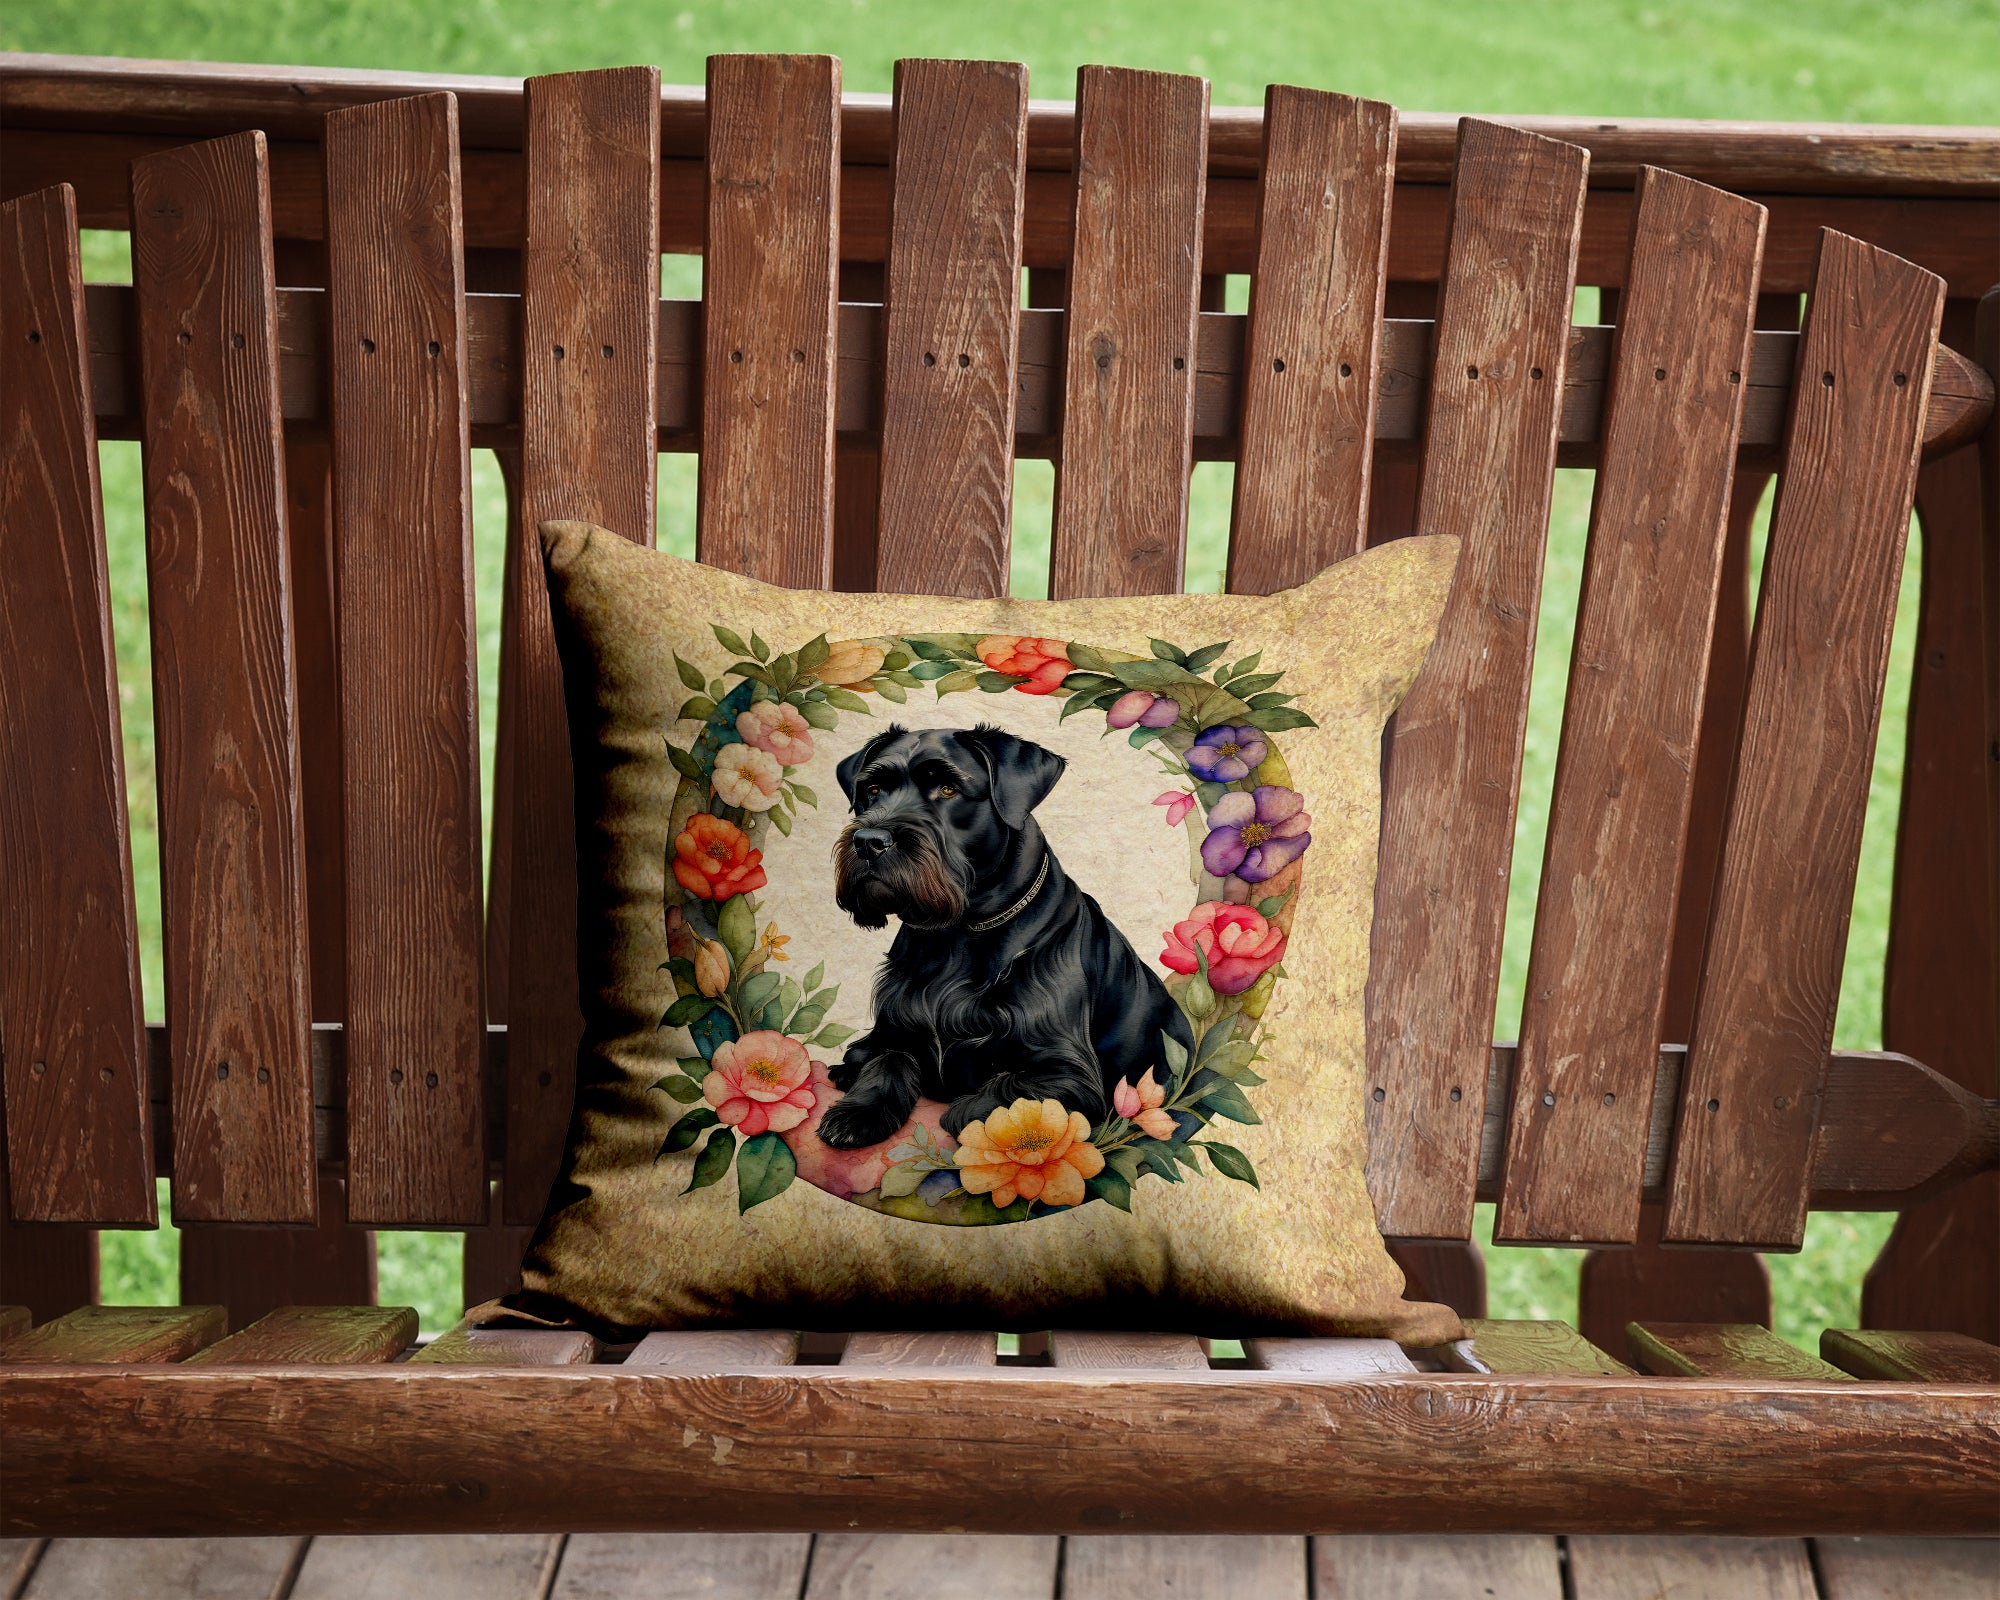 Buy this Giant Schnauzer and Flowers Fabric Decorative Pillow